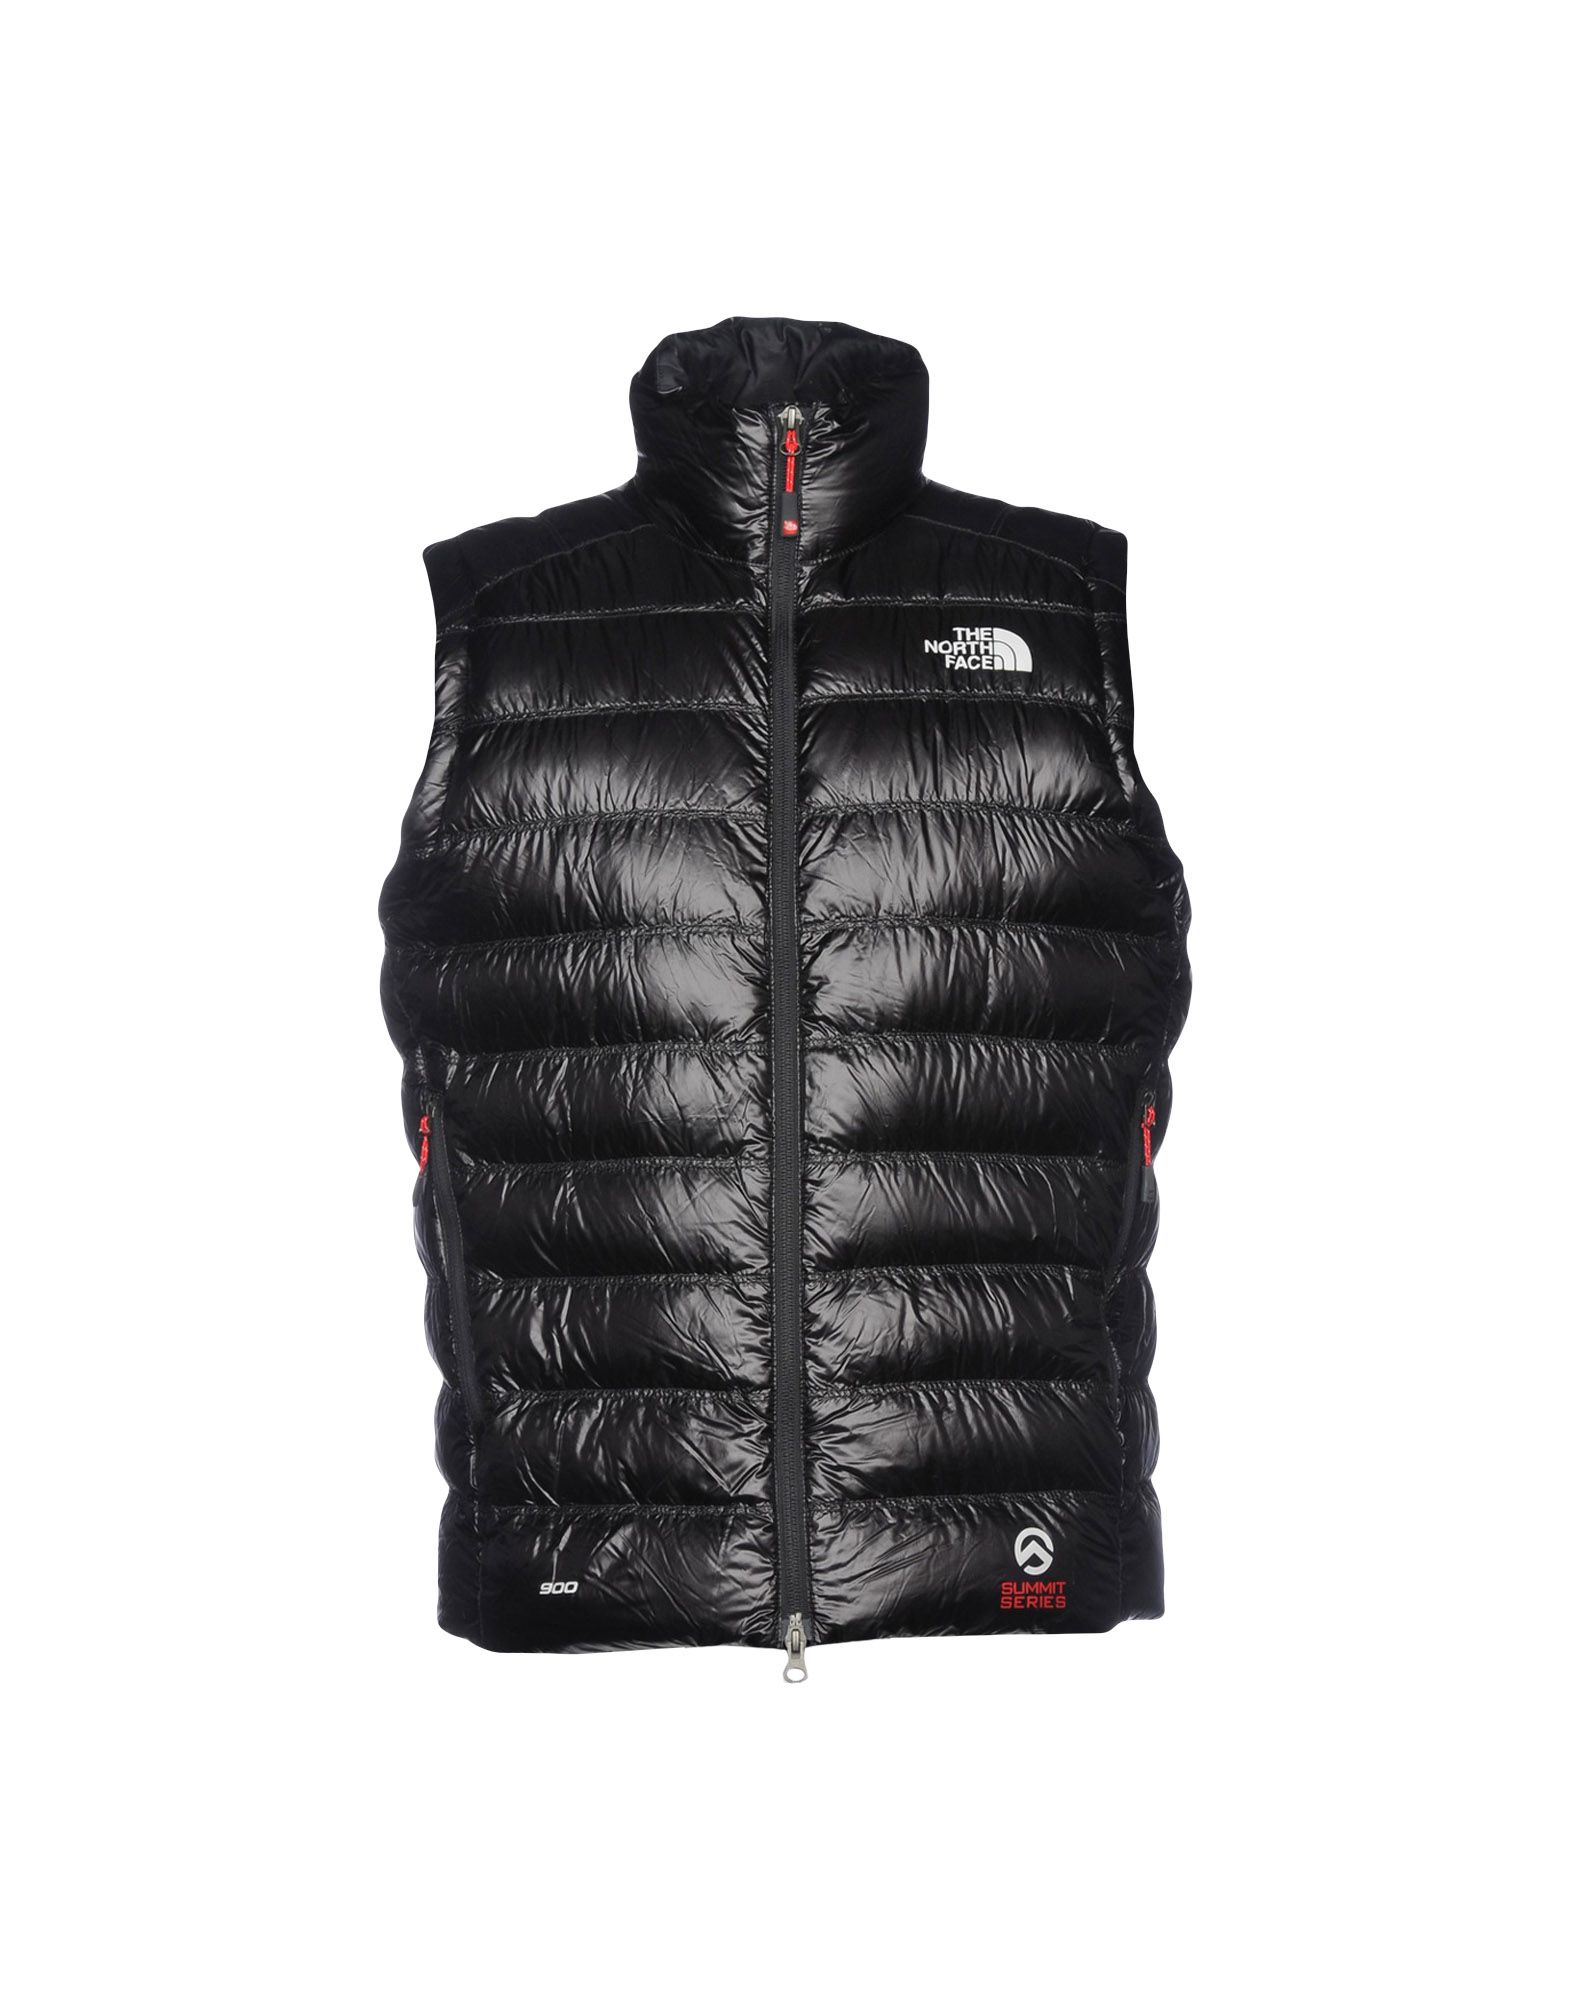 THE NORTH FACE Down jacket,41806508DL 6